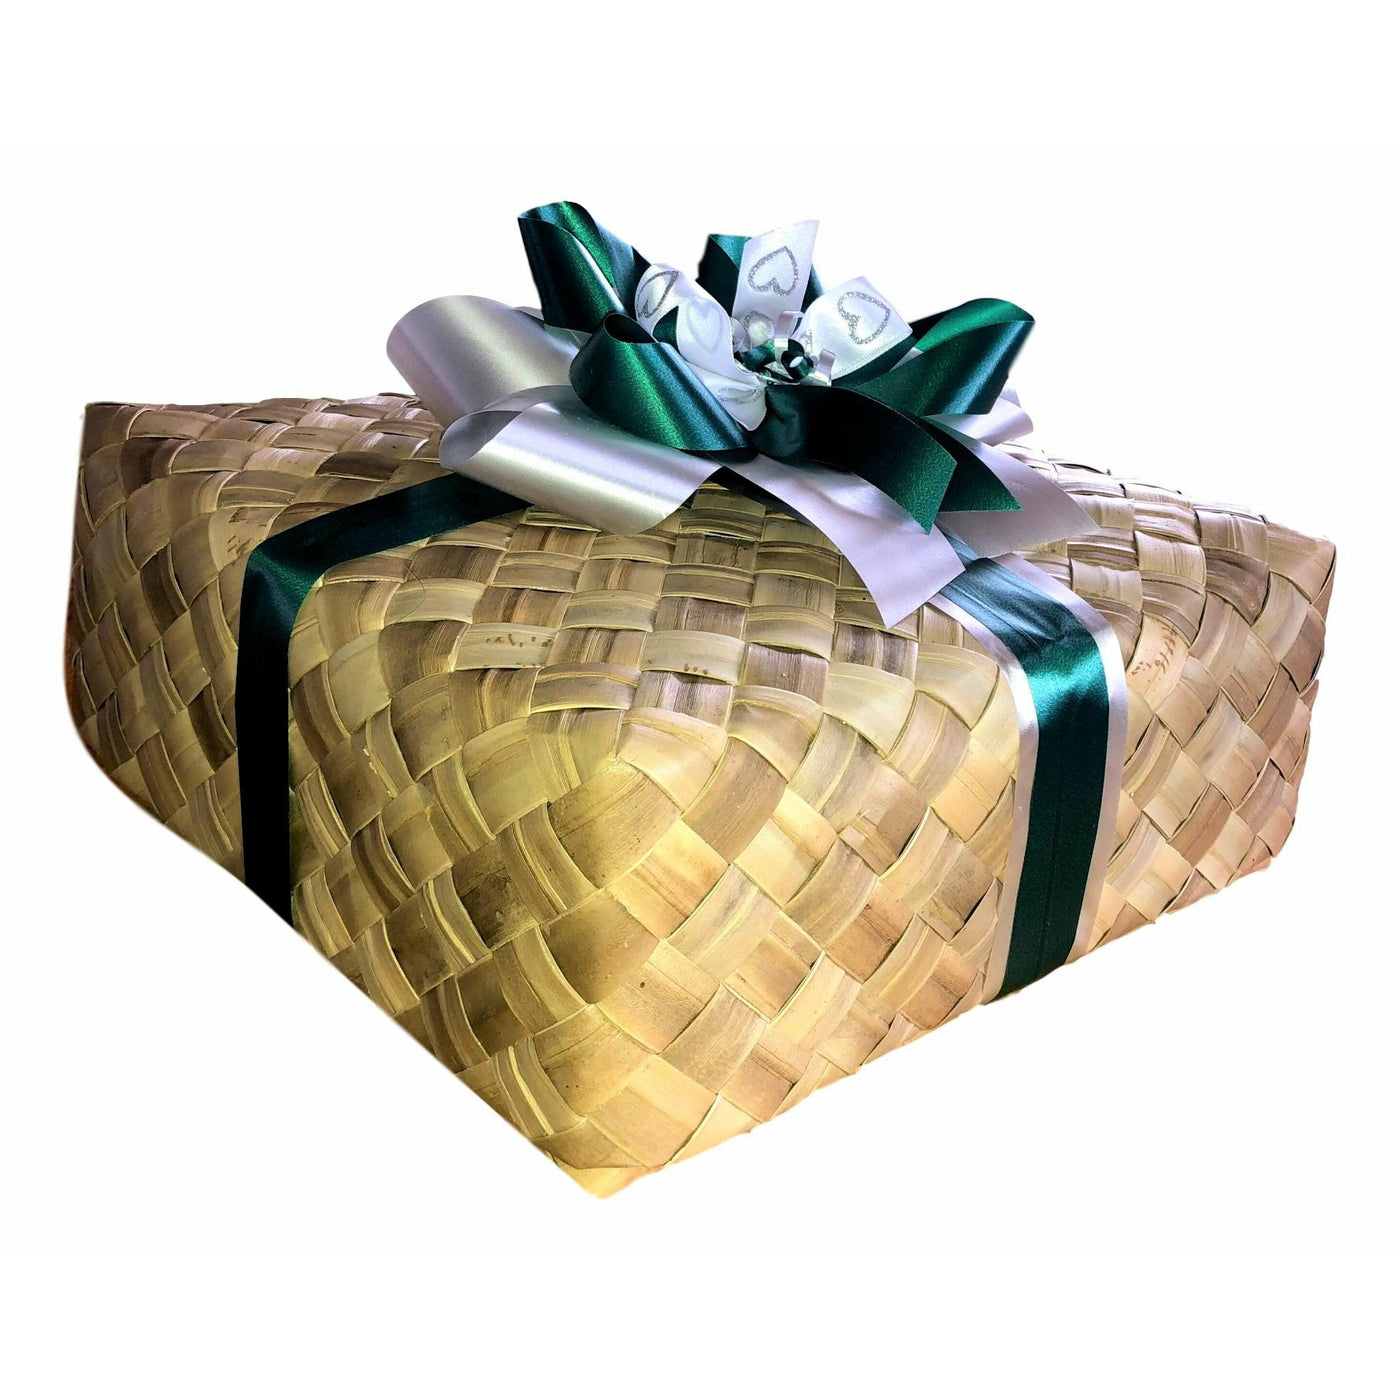 Gourmet gift hampers and gift boxes - Basket Creations NZ